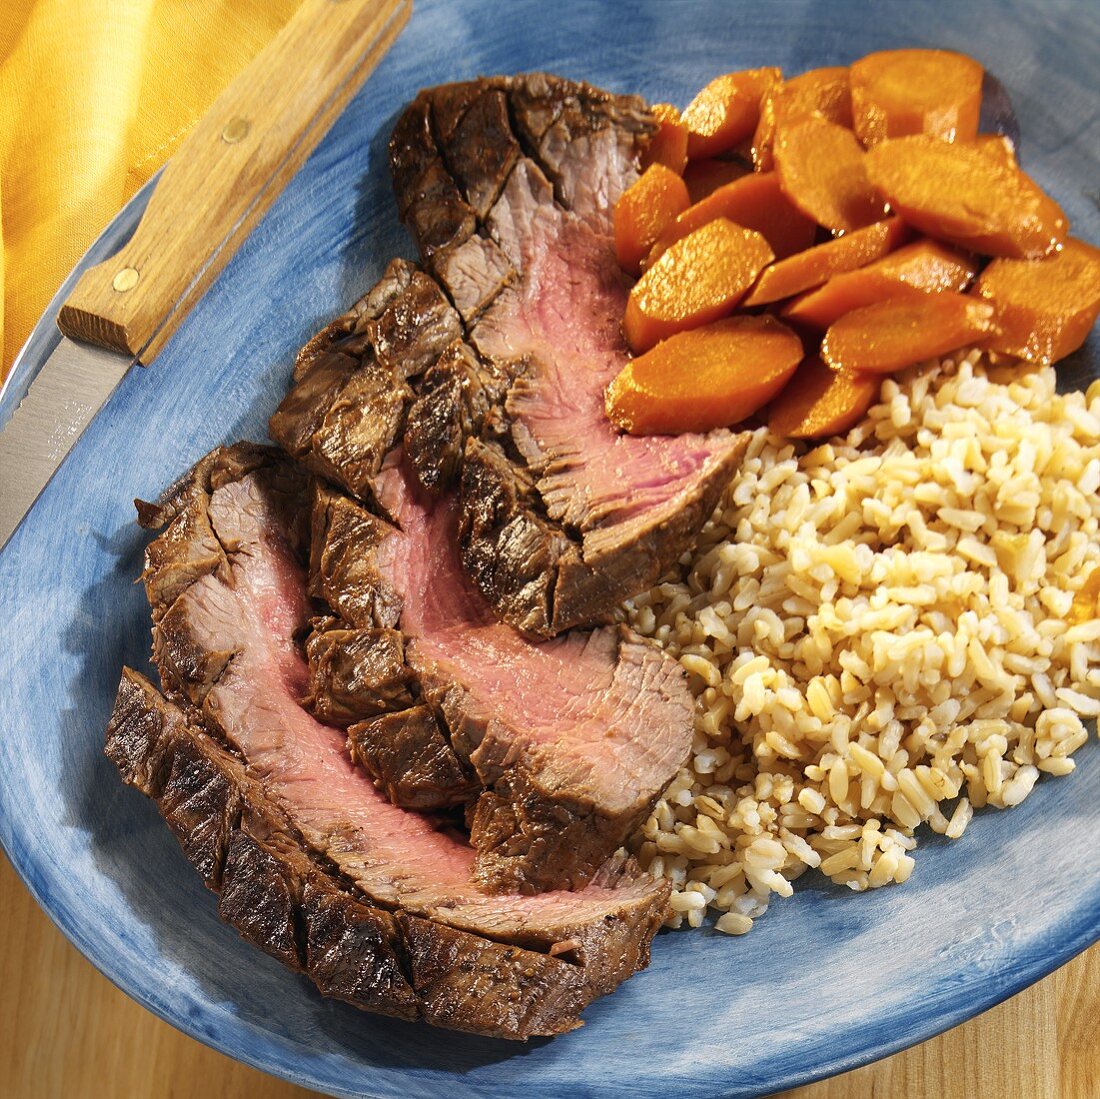 Slices of beef steak with carrots and rice